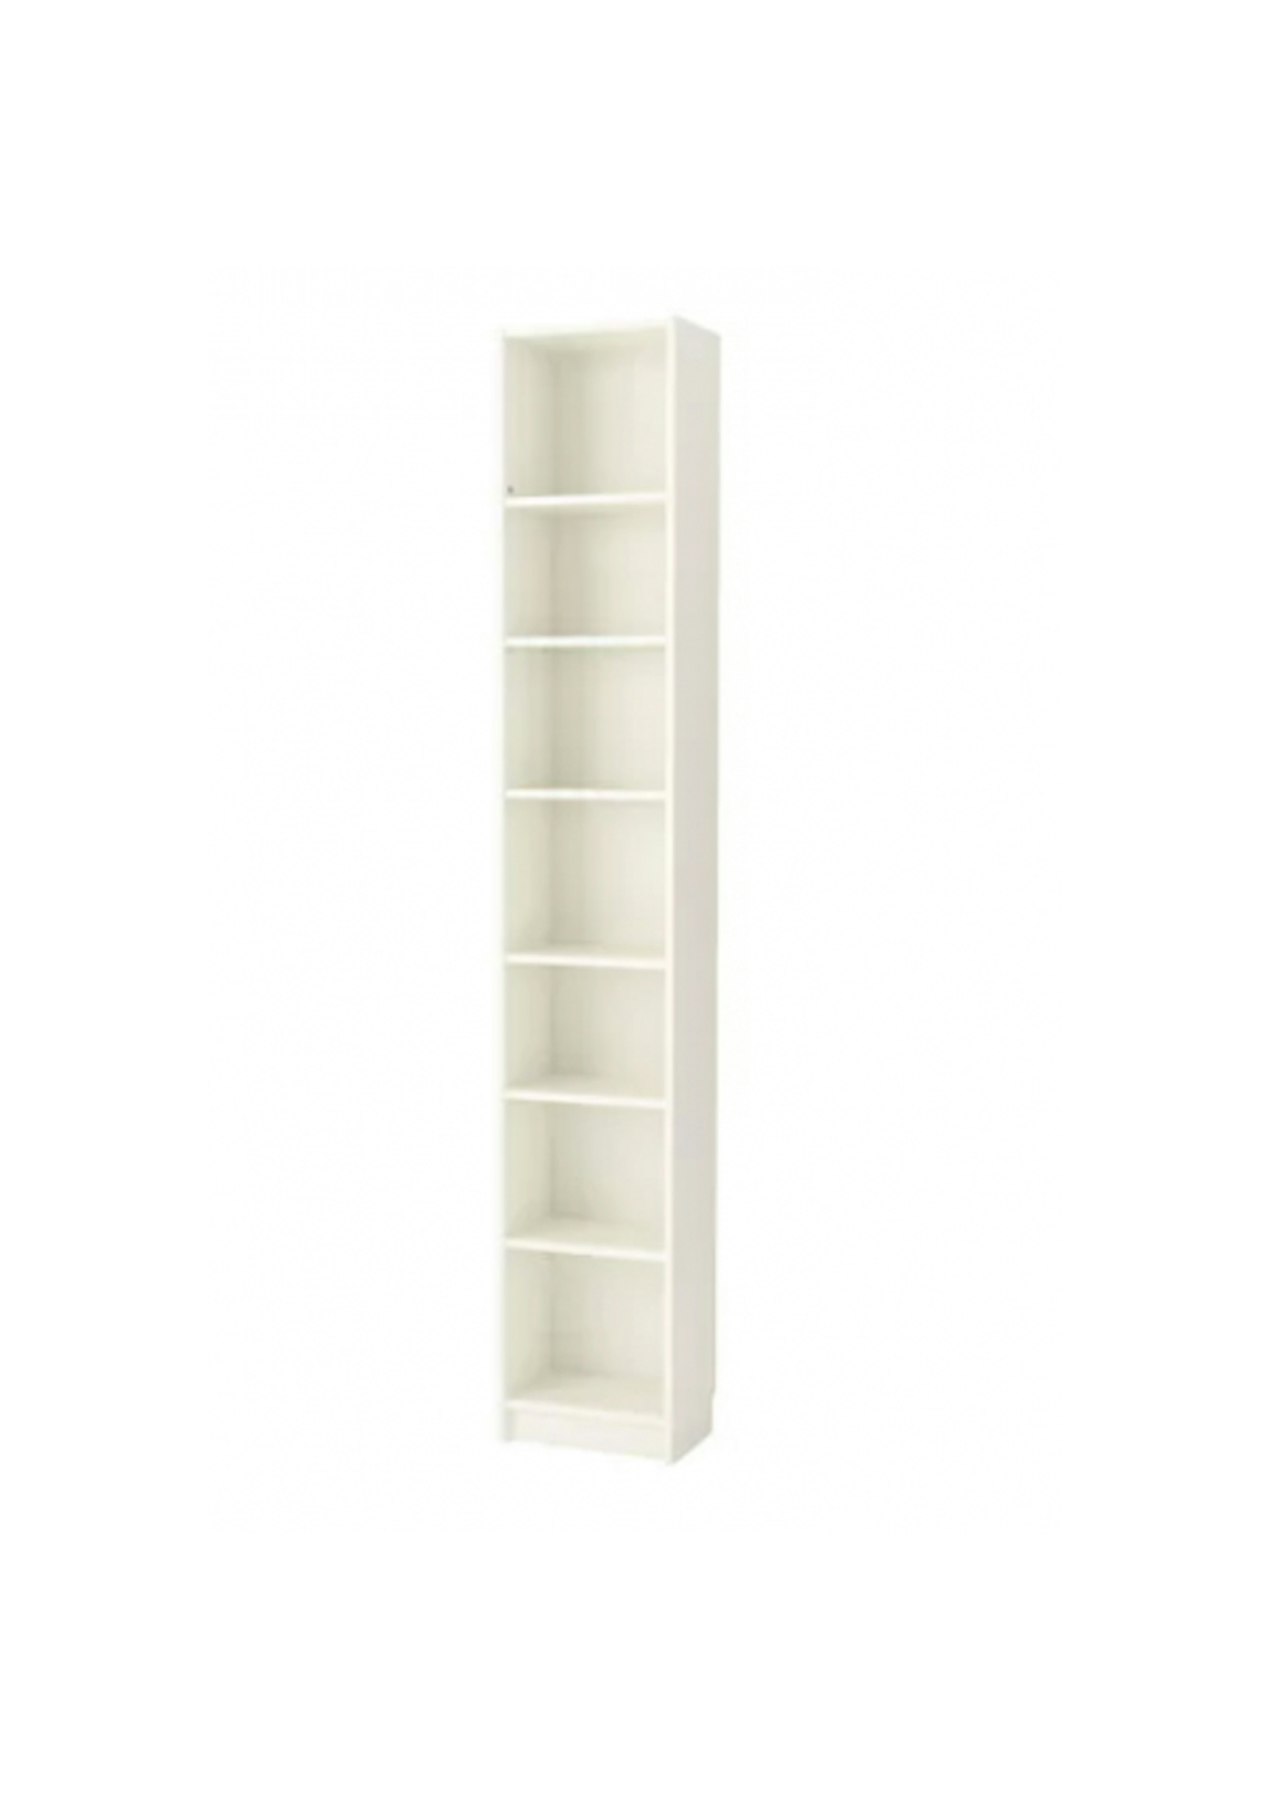 Ikea Billy Bookcase 40x28x237cm White Affordable Ikea Home